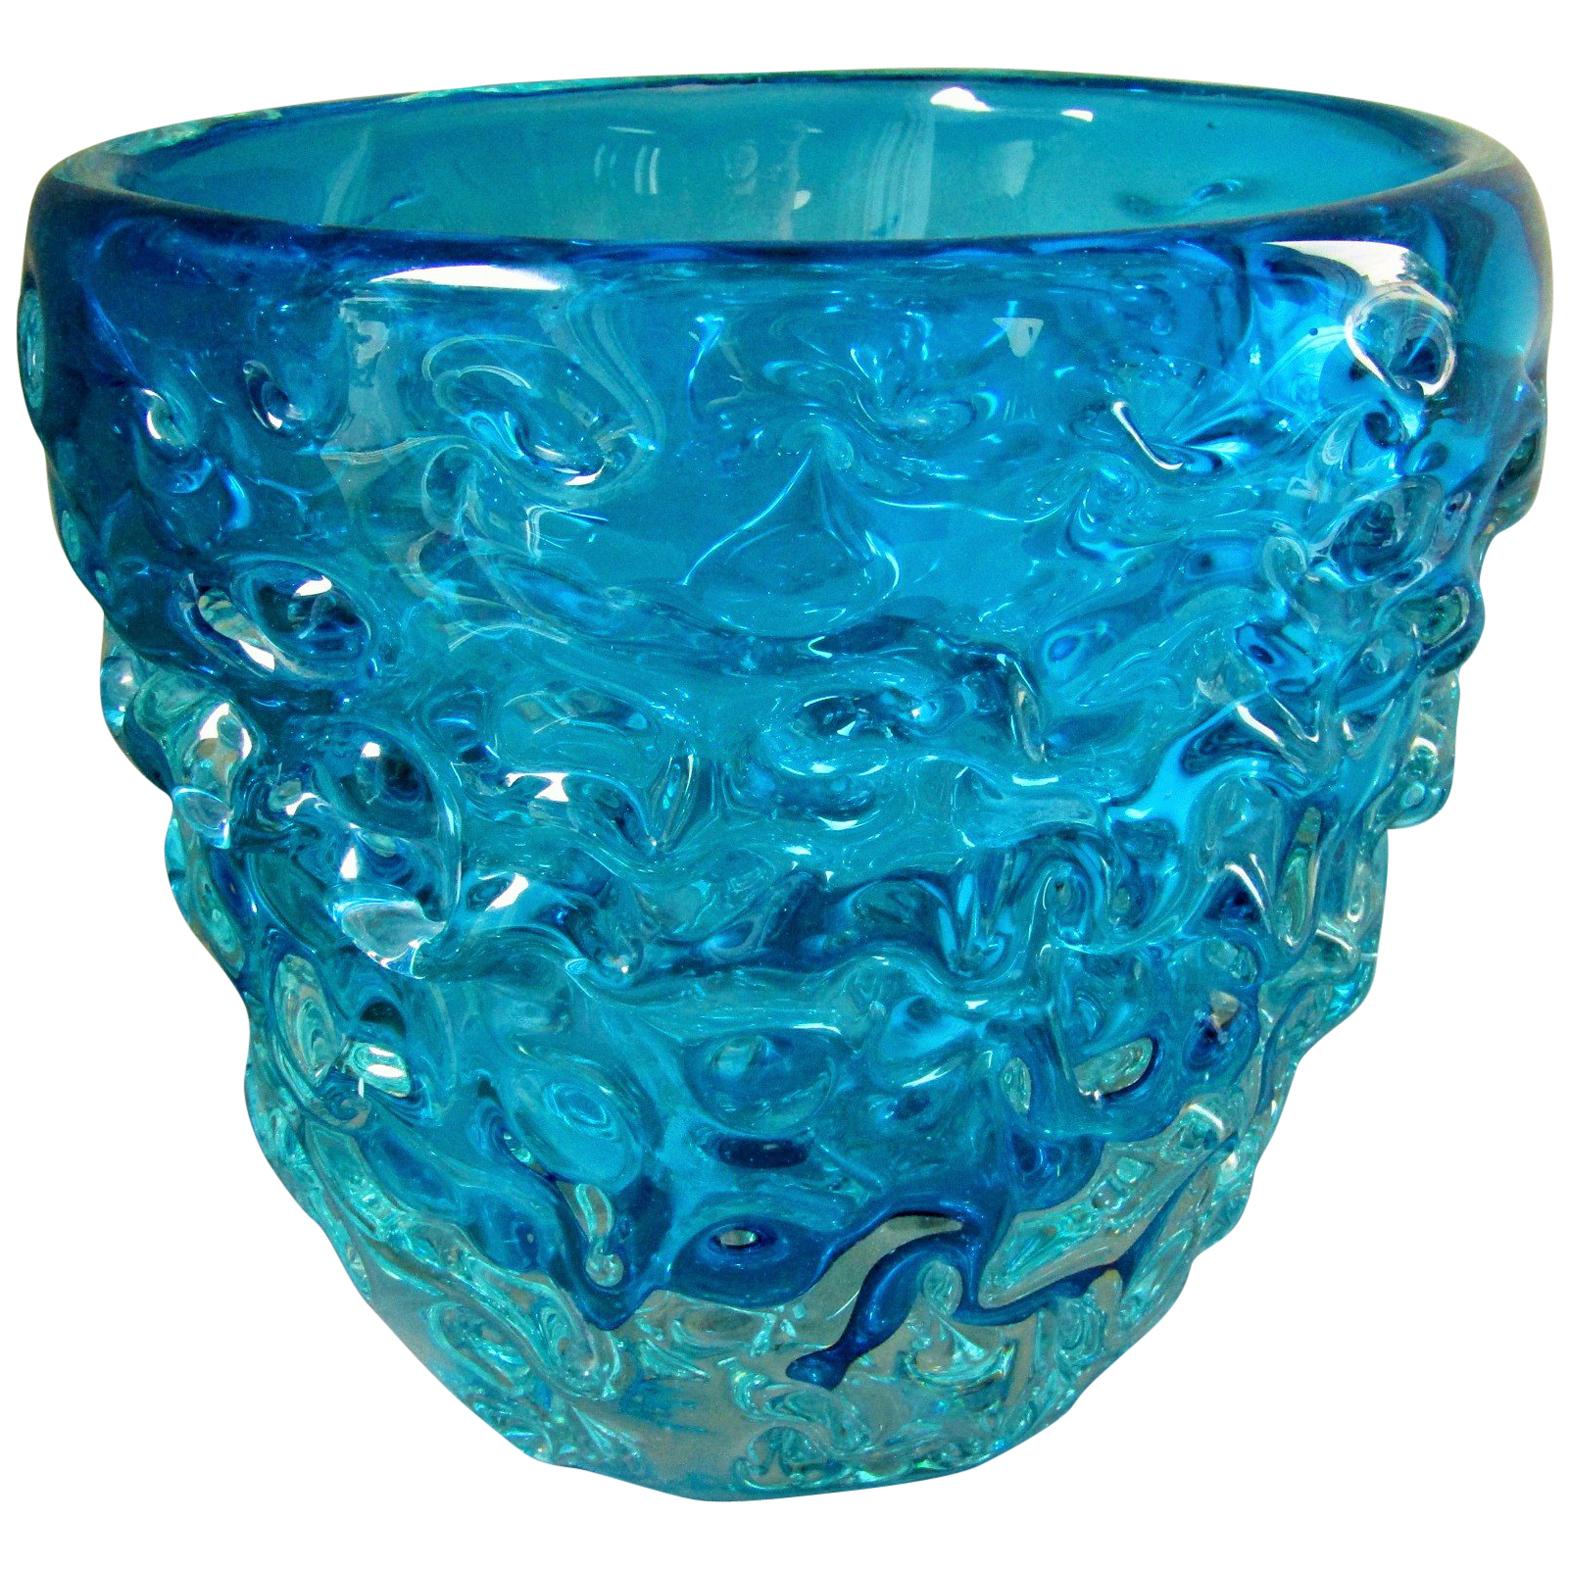 Midcentury Centerpiece Bowl Vase Champagne Cooler Blue Murano Glass, Italy, 1960